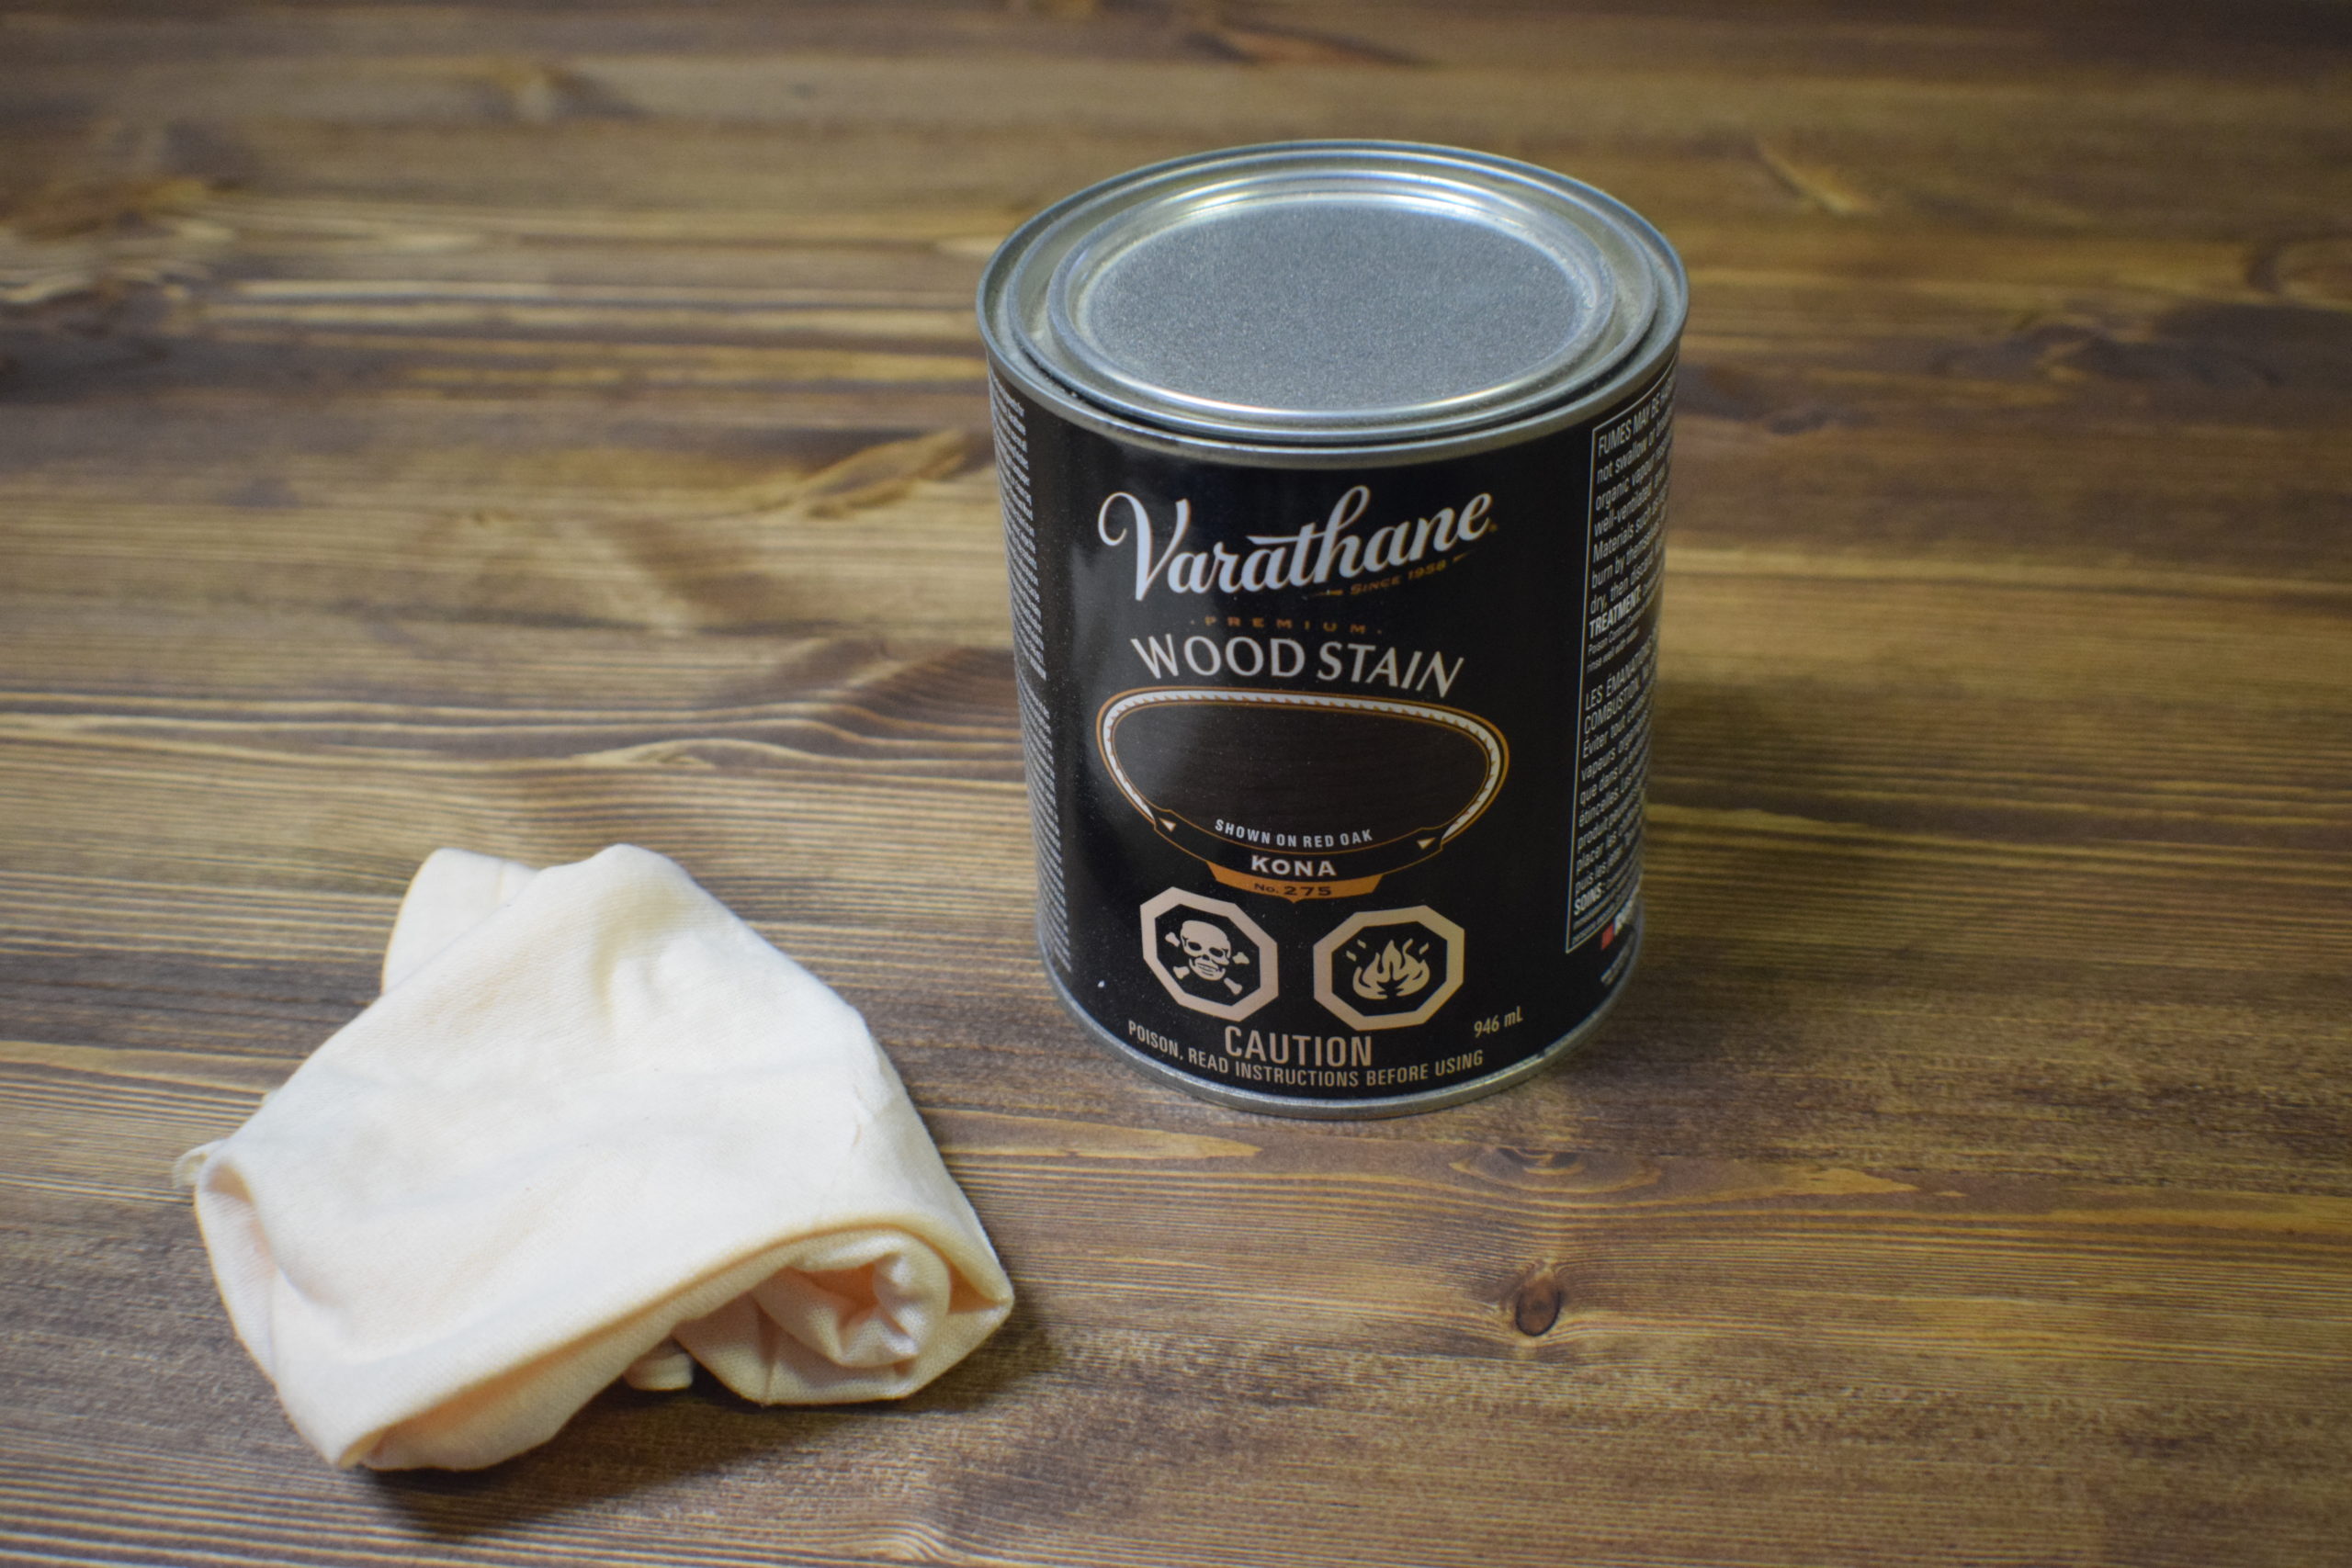 can of varathane premium wood stain with black label on wood table with rag